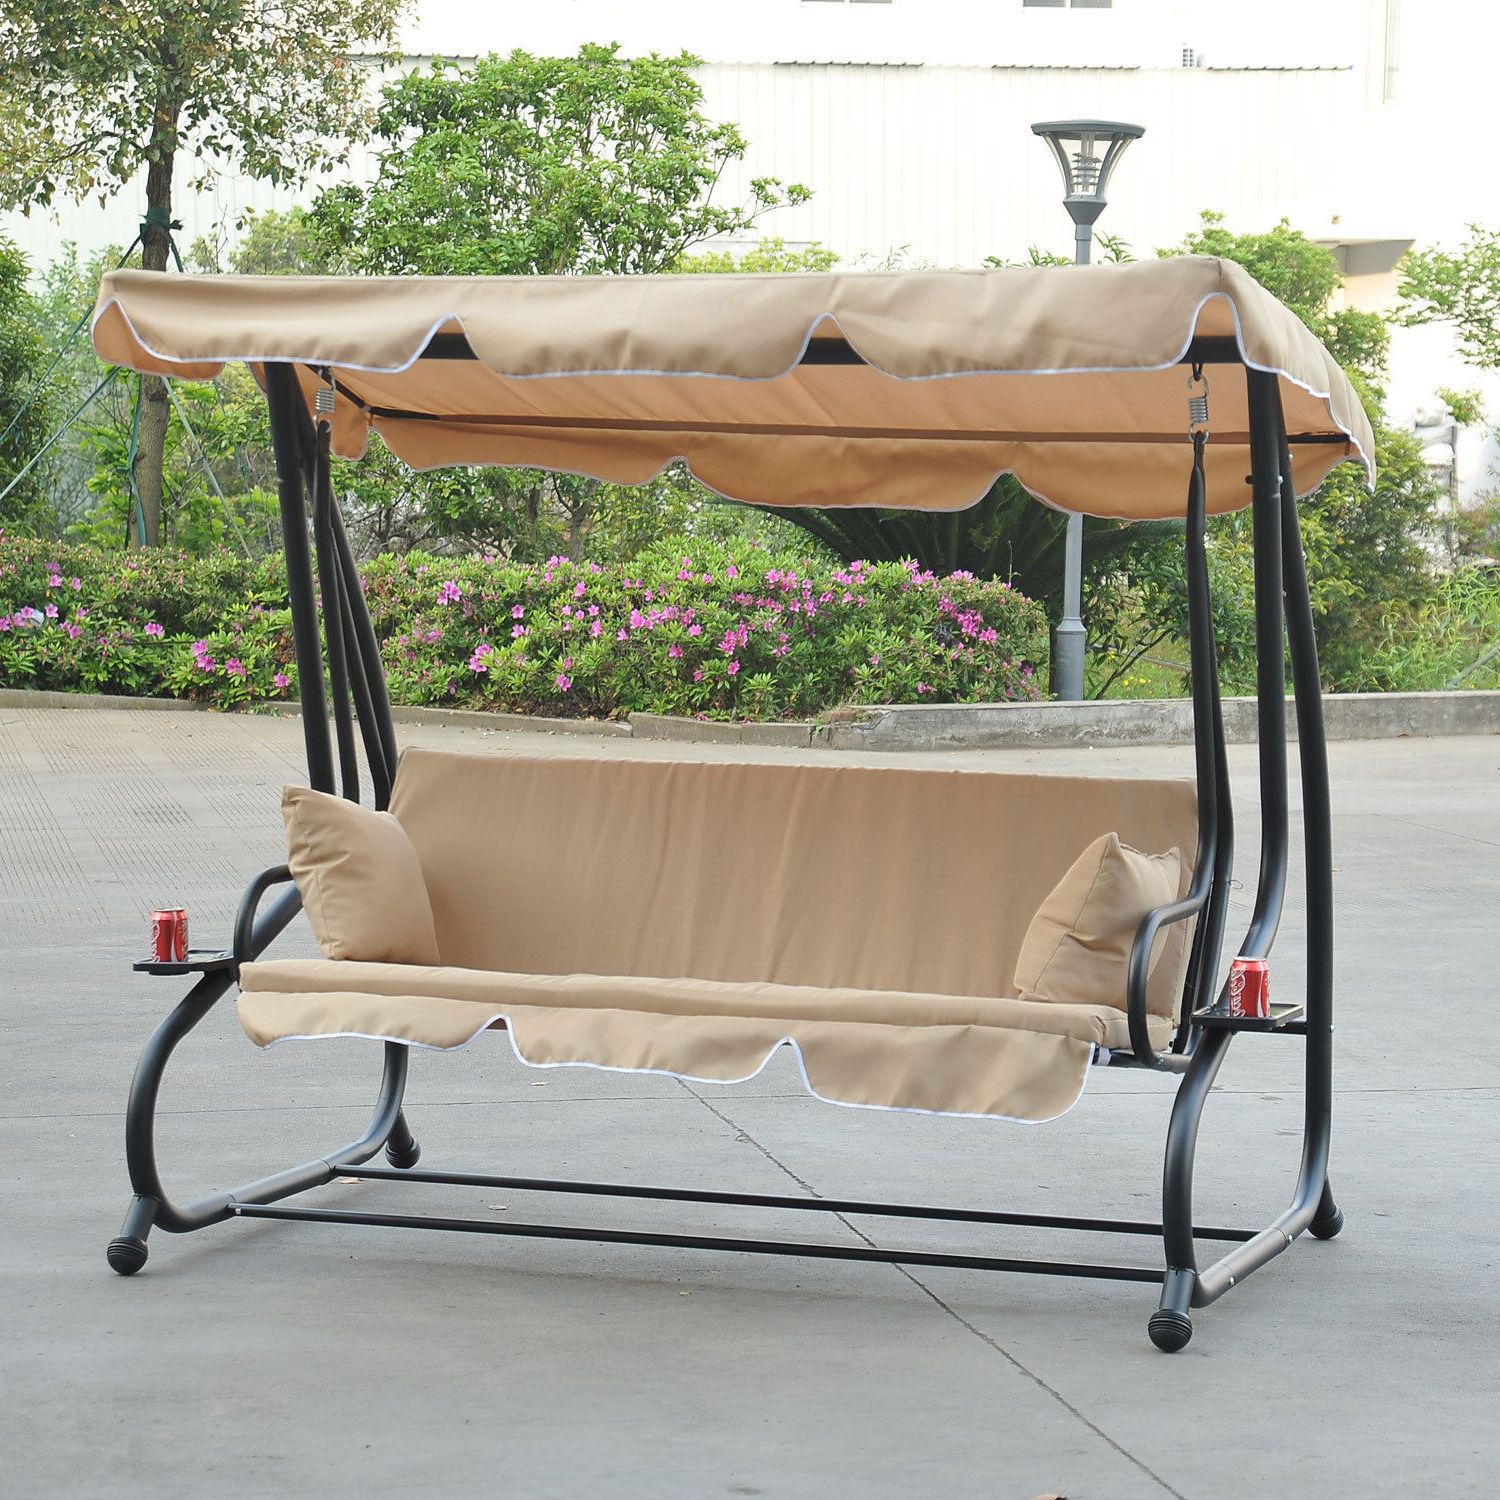 Details About Outdoor 3 Person Patio Porch Swing Hammock Bench Canopy  Loveseat Convertible Bed For Recent Canopy Porch Swings (View 25 of 25)